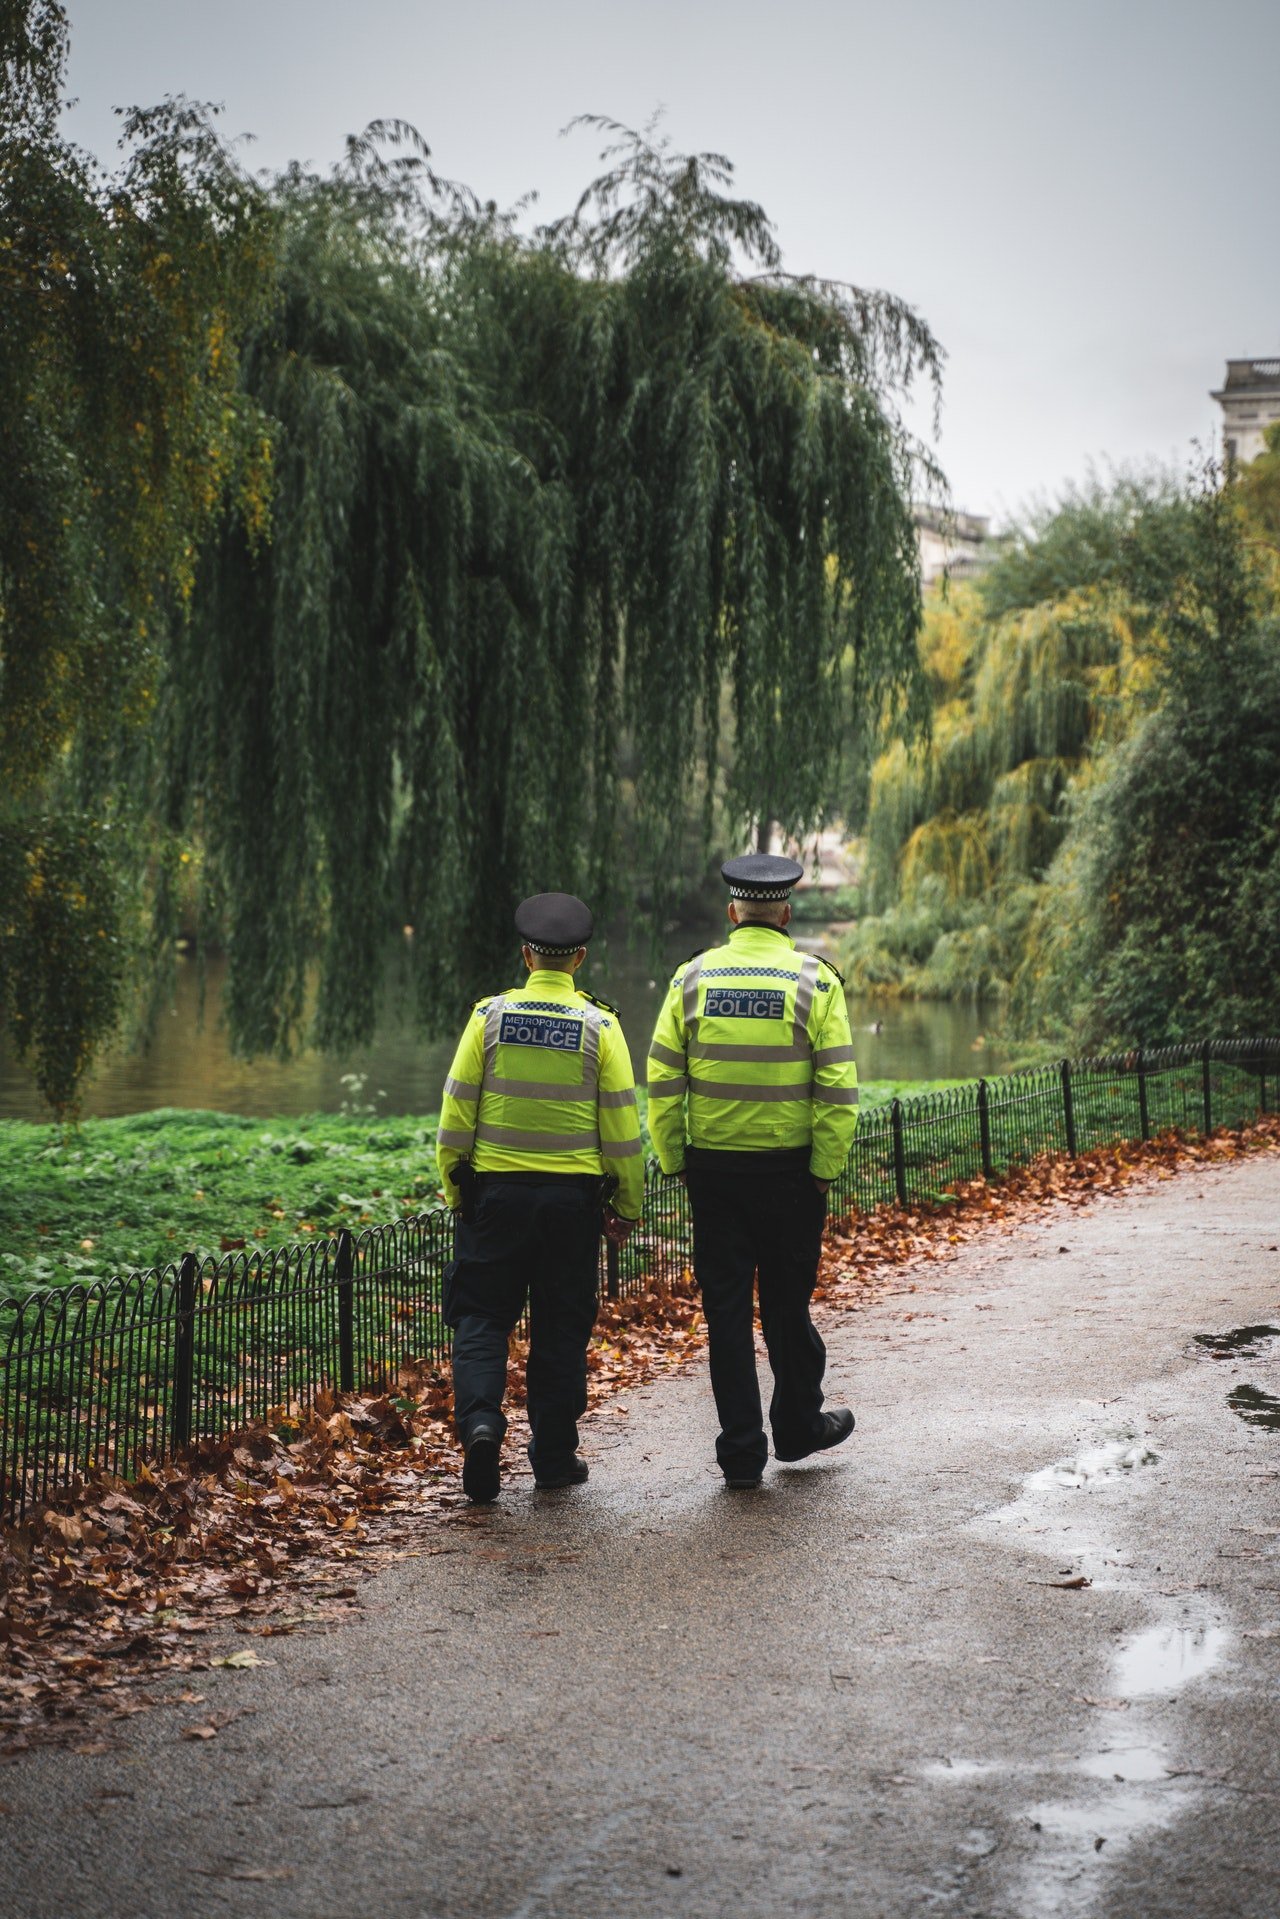 Two police men walking down the road | Photo: Pexels